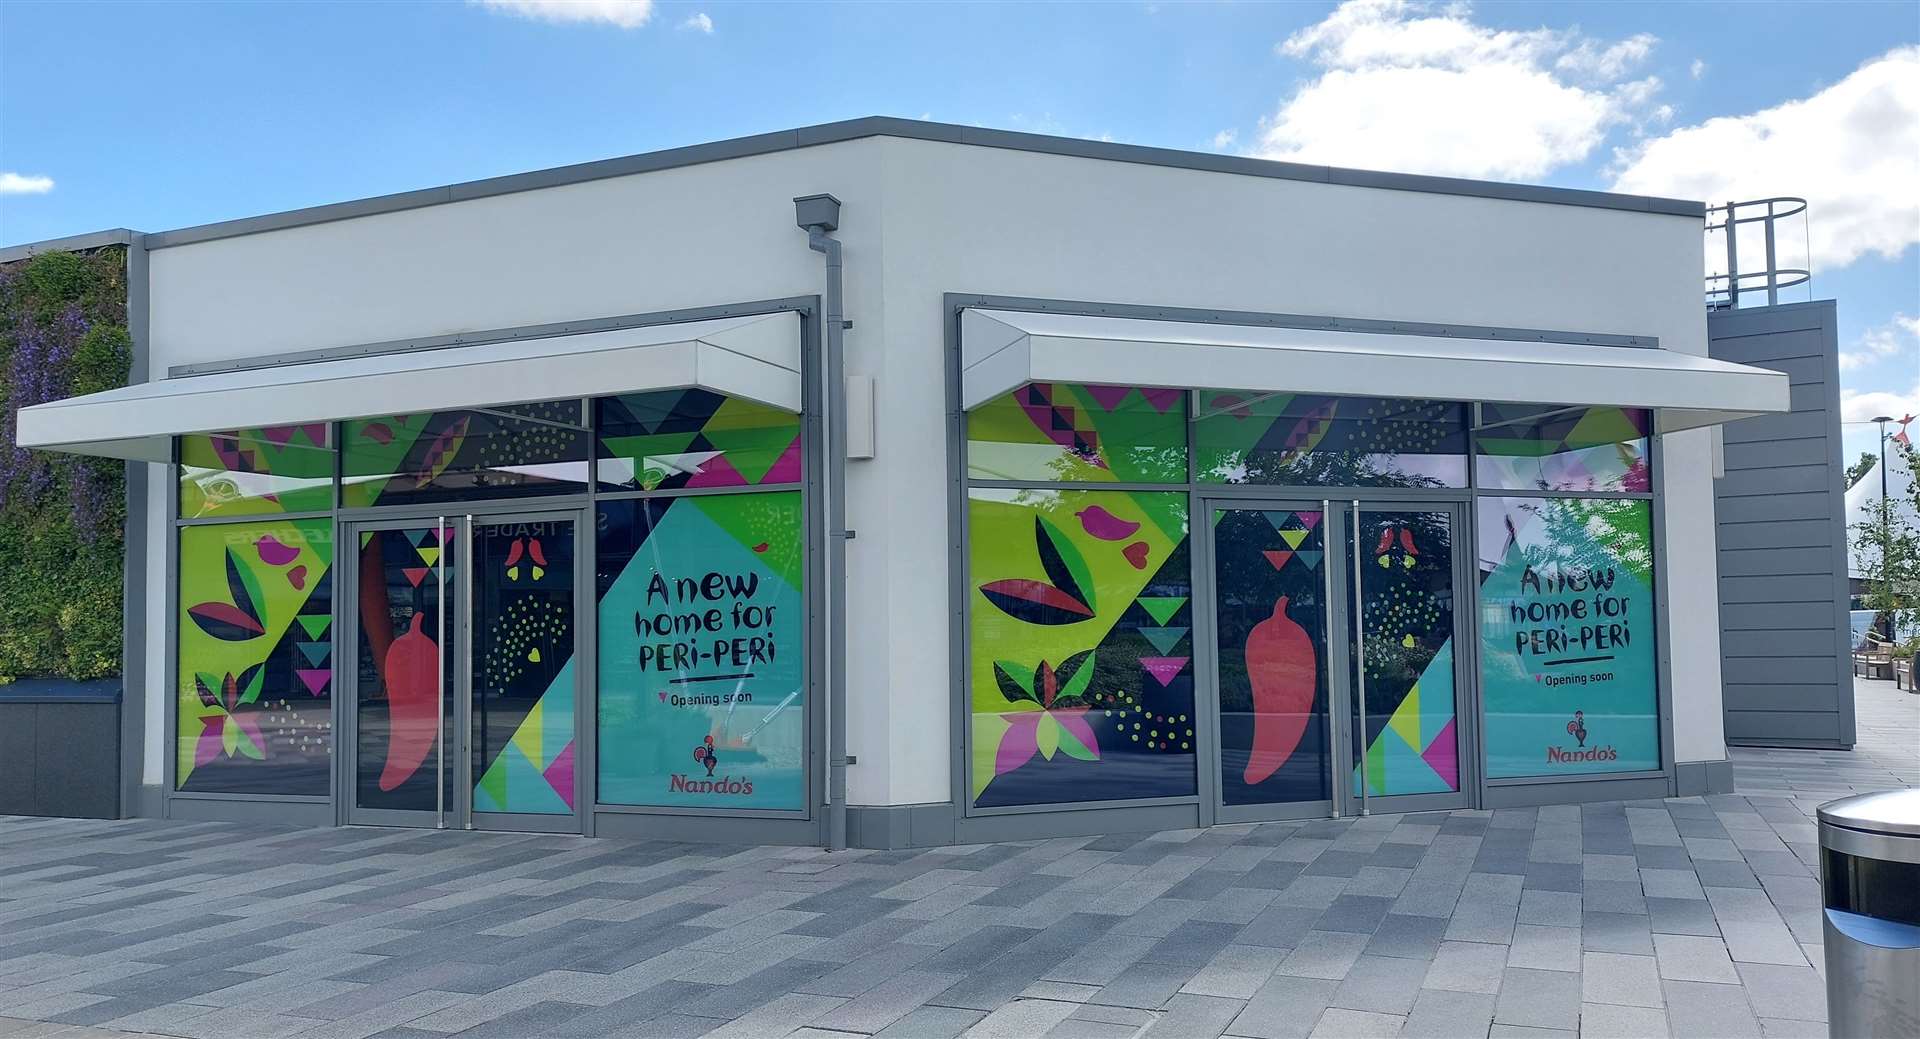 Signs in the window confirm Nando's will 'open soon'